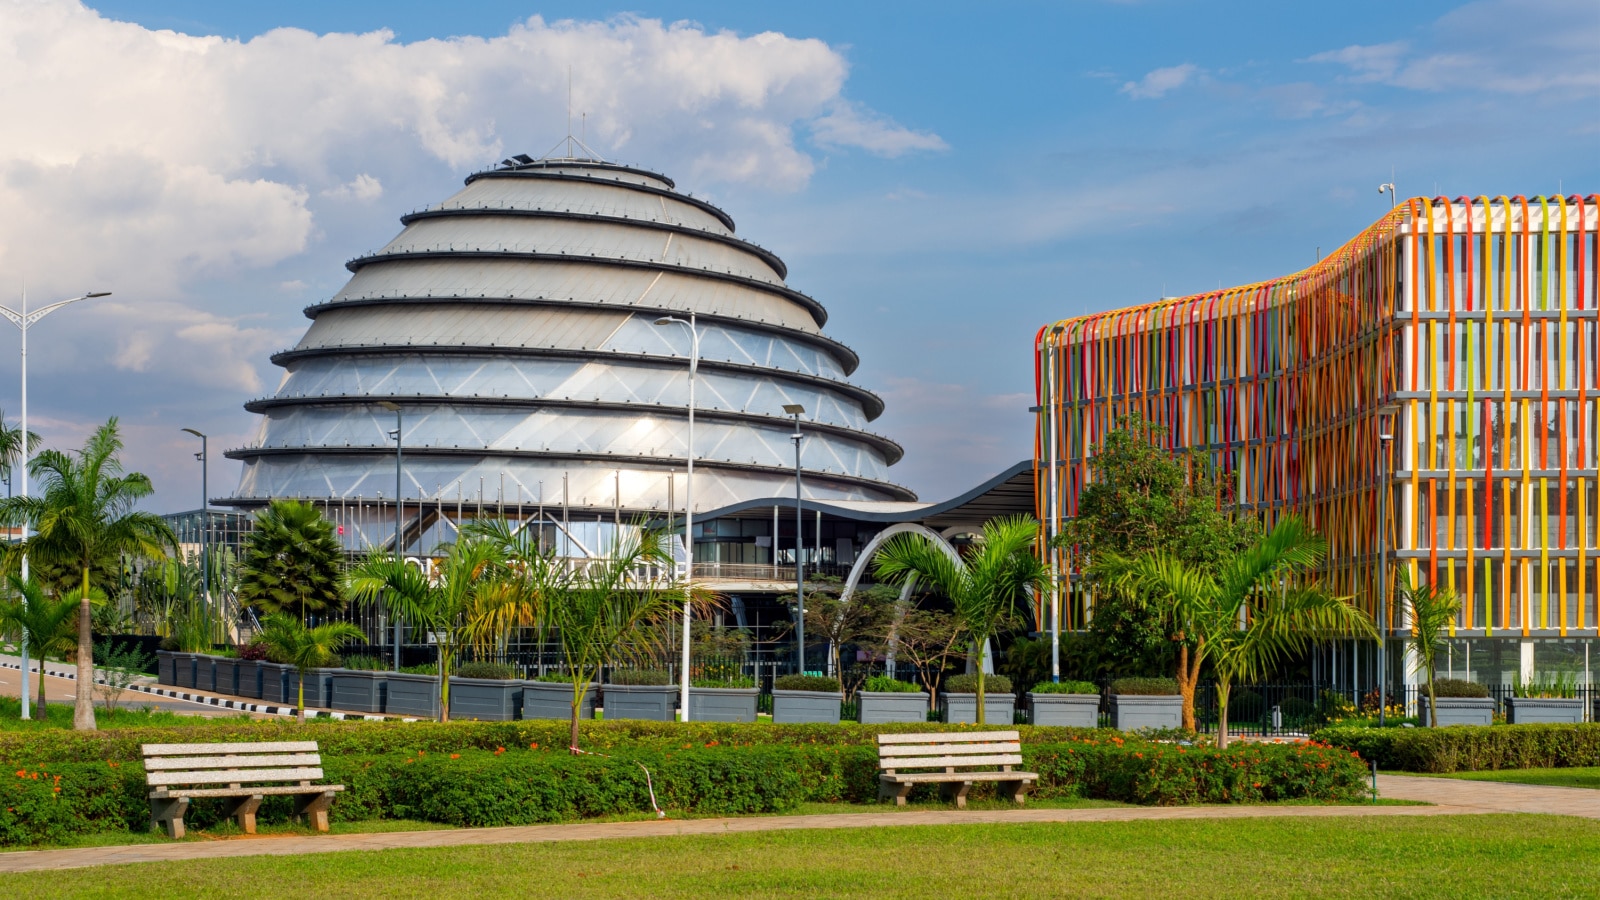 Kigali, Rwanda - August 19 2022: Kigali Convention Centre on a sunny day. The facility, designed after the inside of a king's palace, hosts a variety of events